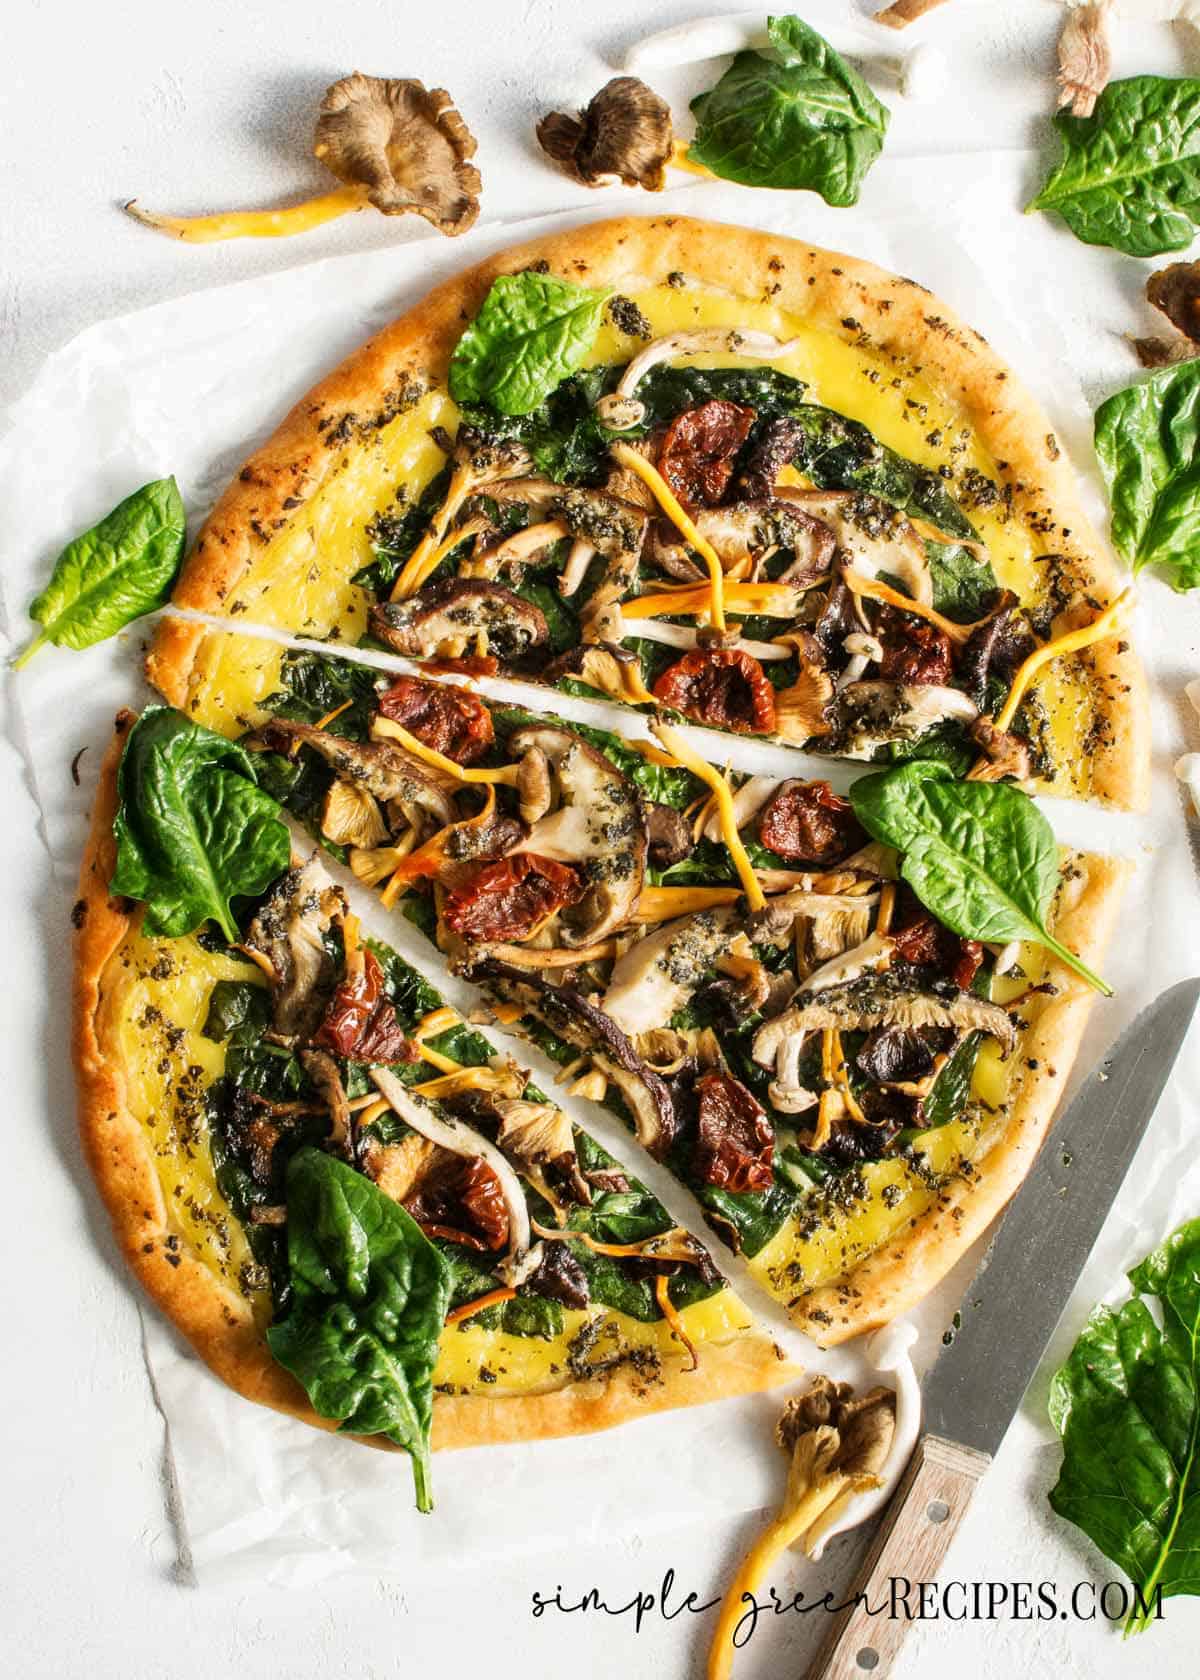 Sliced pizza topped with cheese and veggies and mushrooms against a white background.